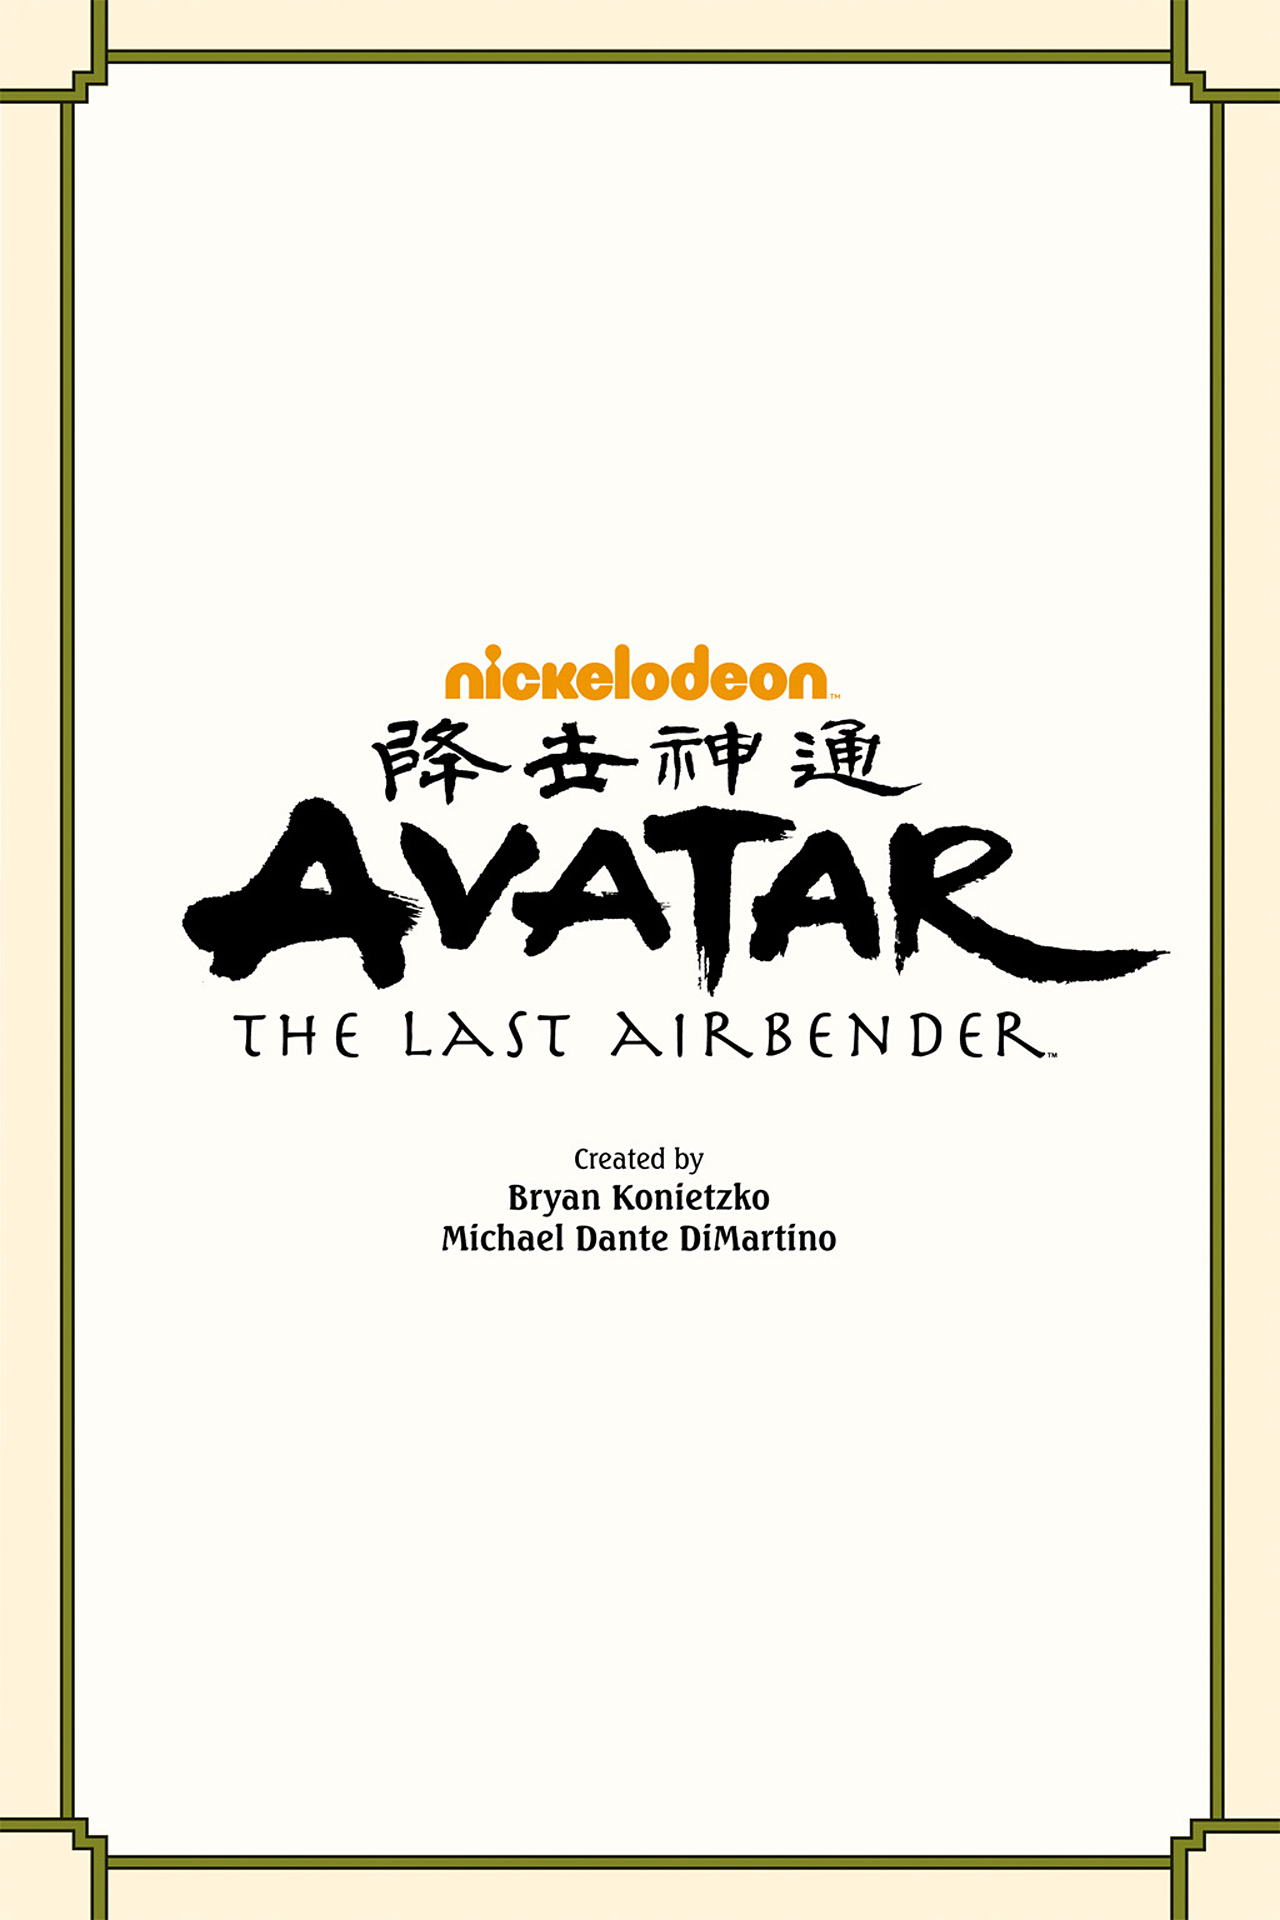 Read online Nickelodeon Avatar: The Last Airbender - The Lost Adventures comic -  Issue # Full - 2